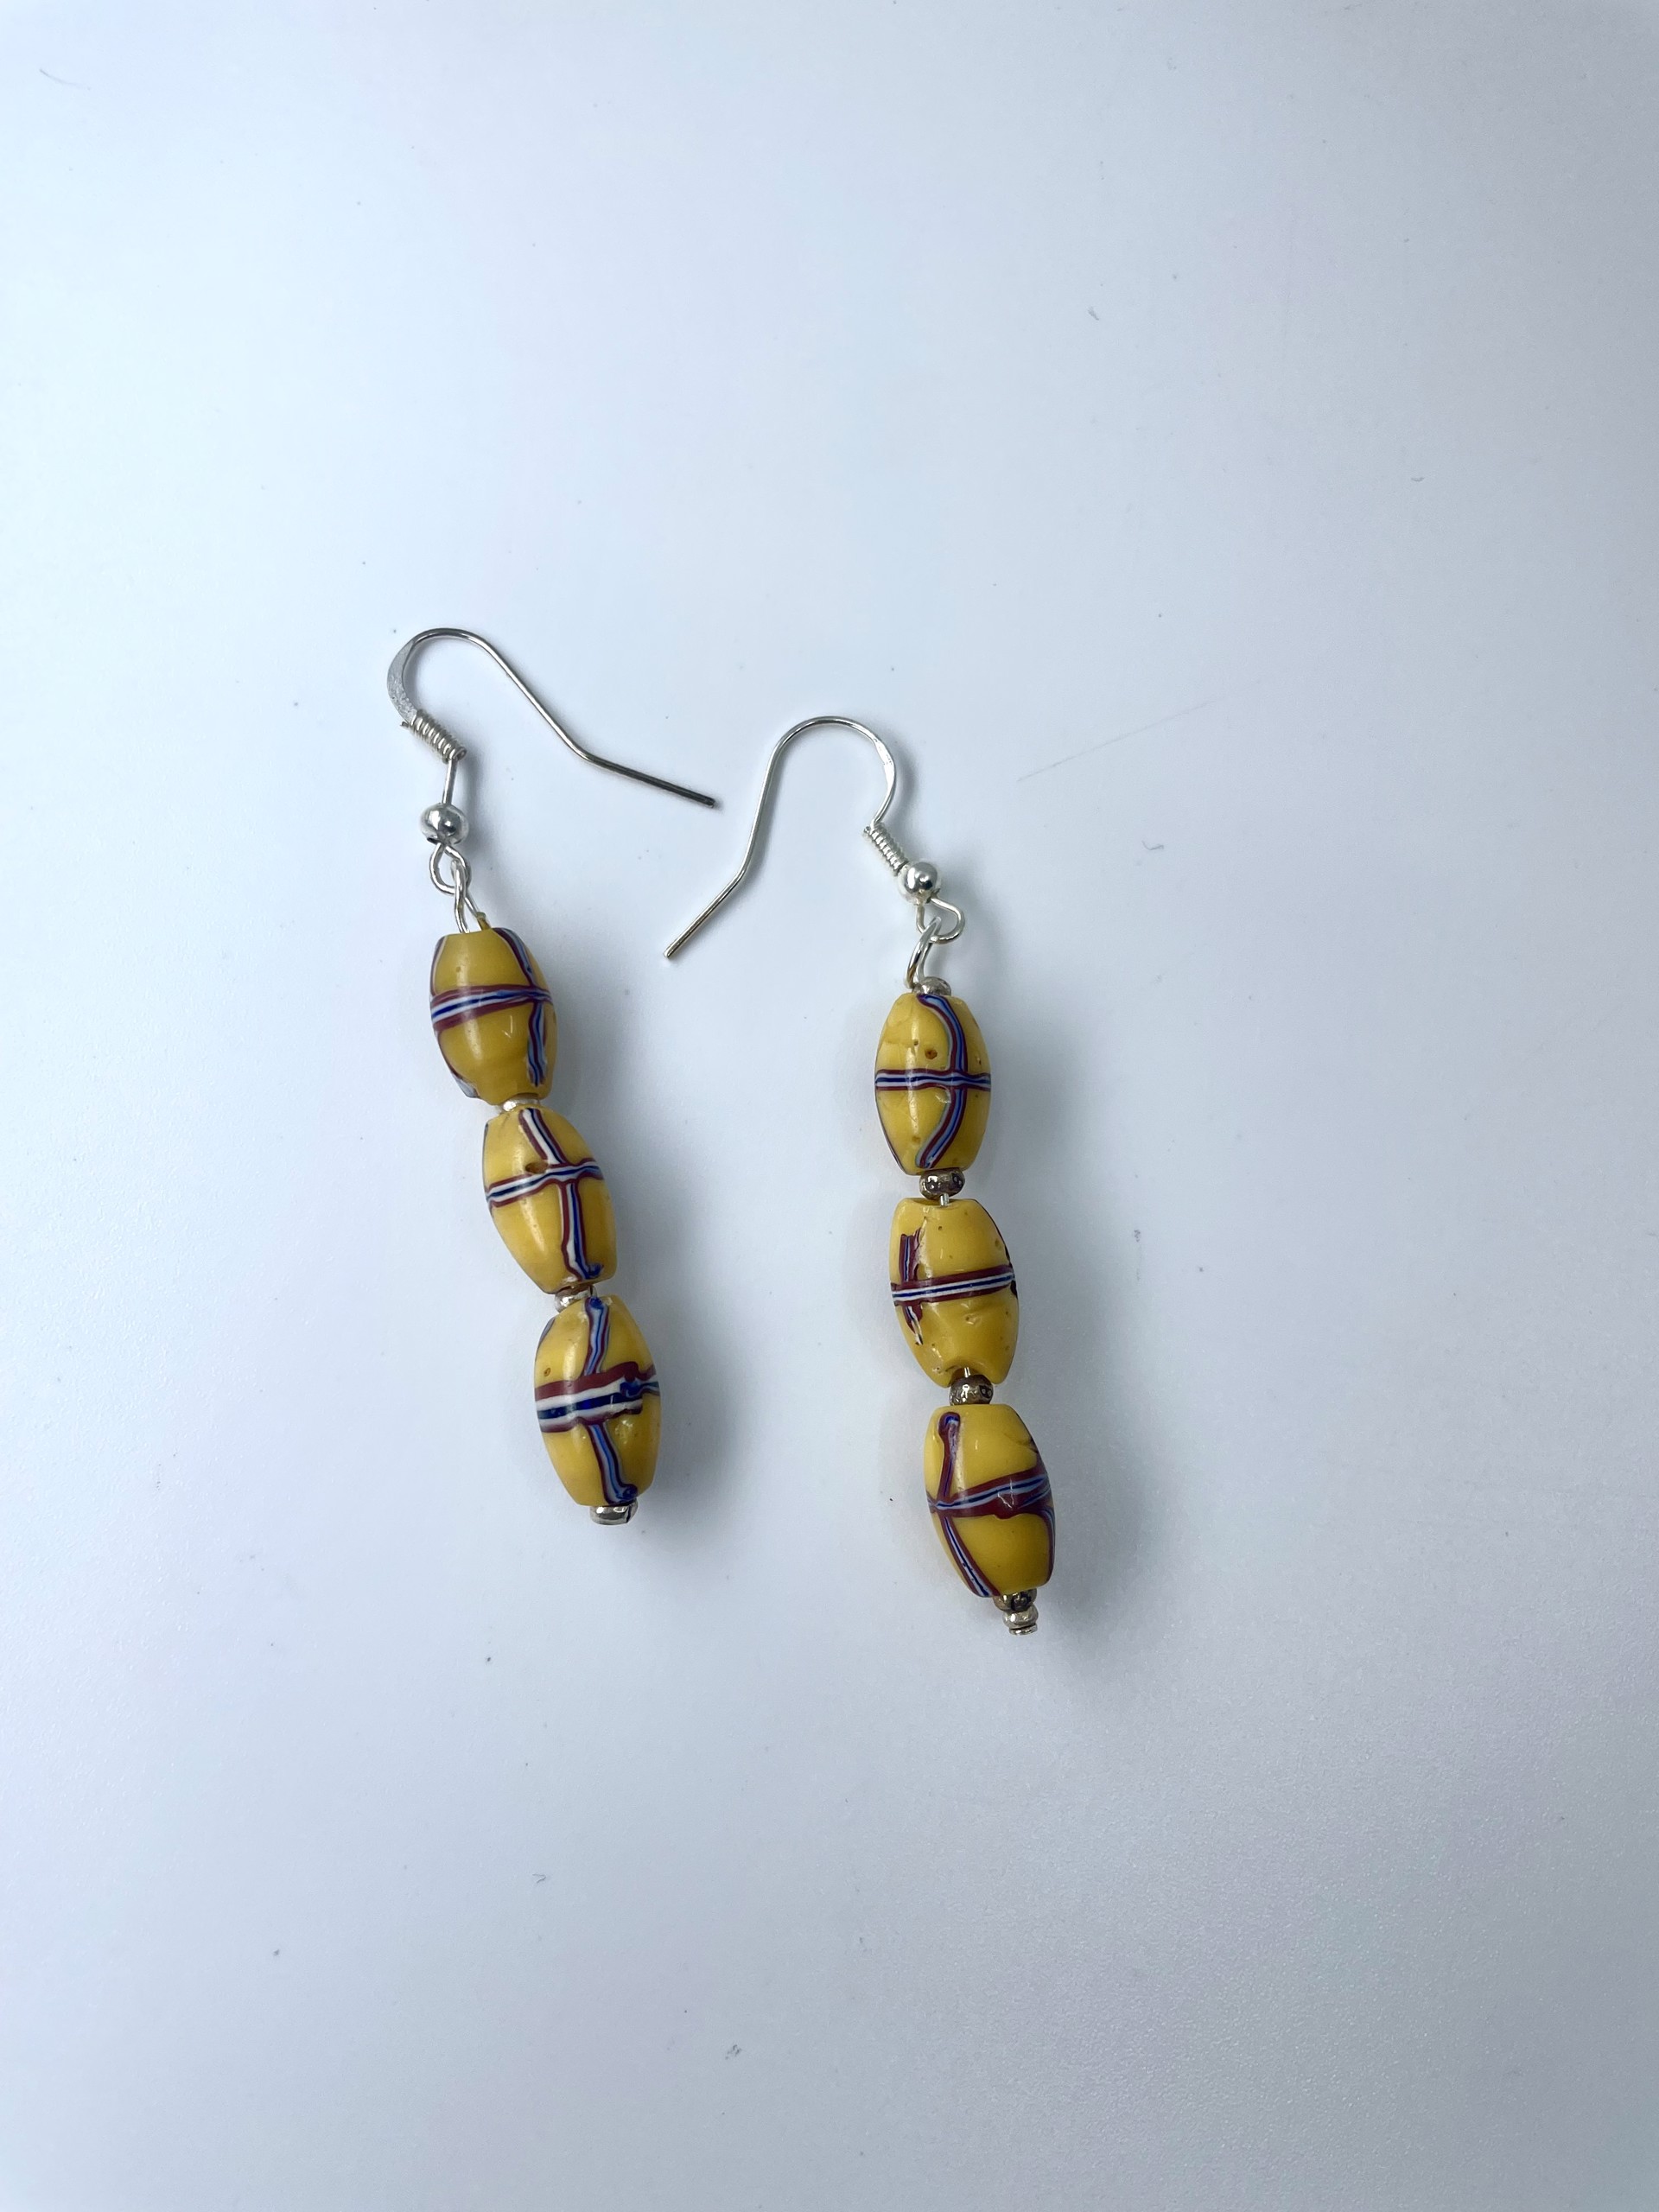 1113 African Trade Earrings by Gina Caruso